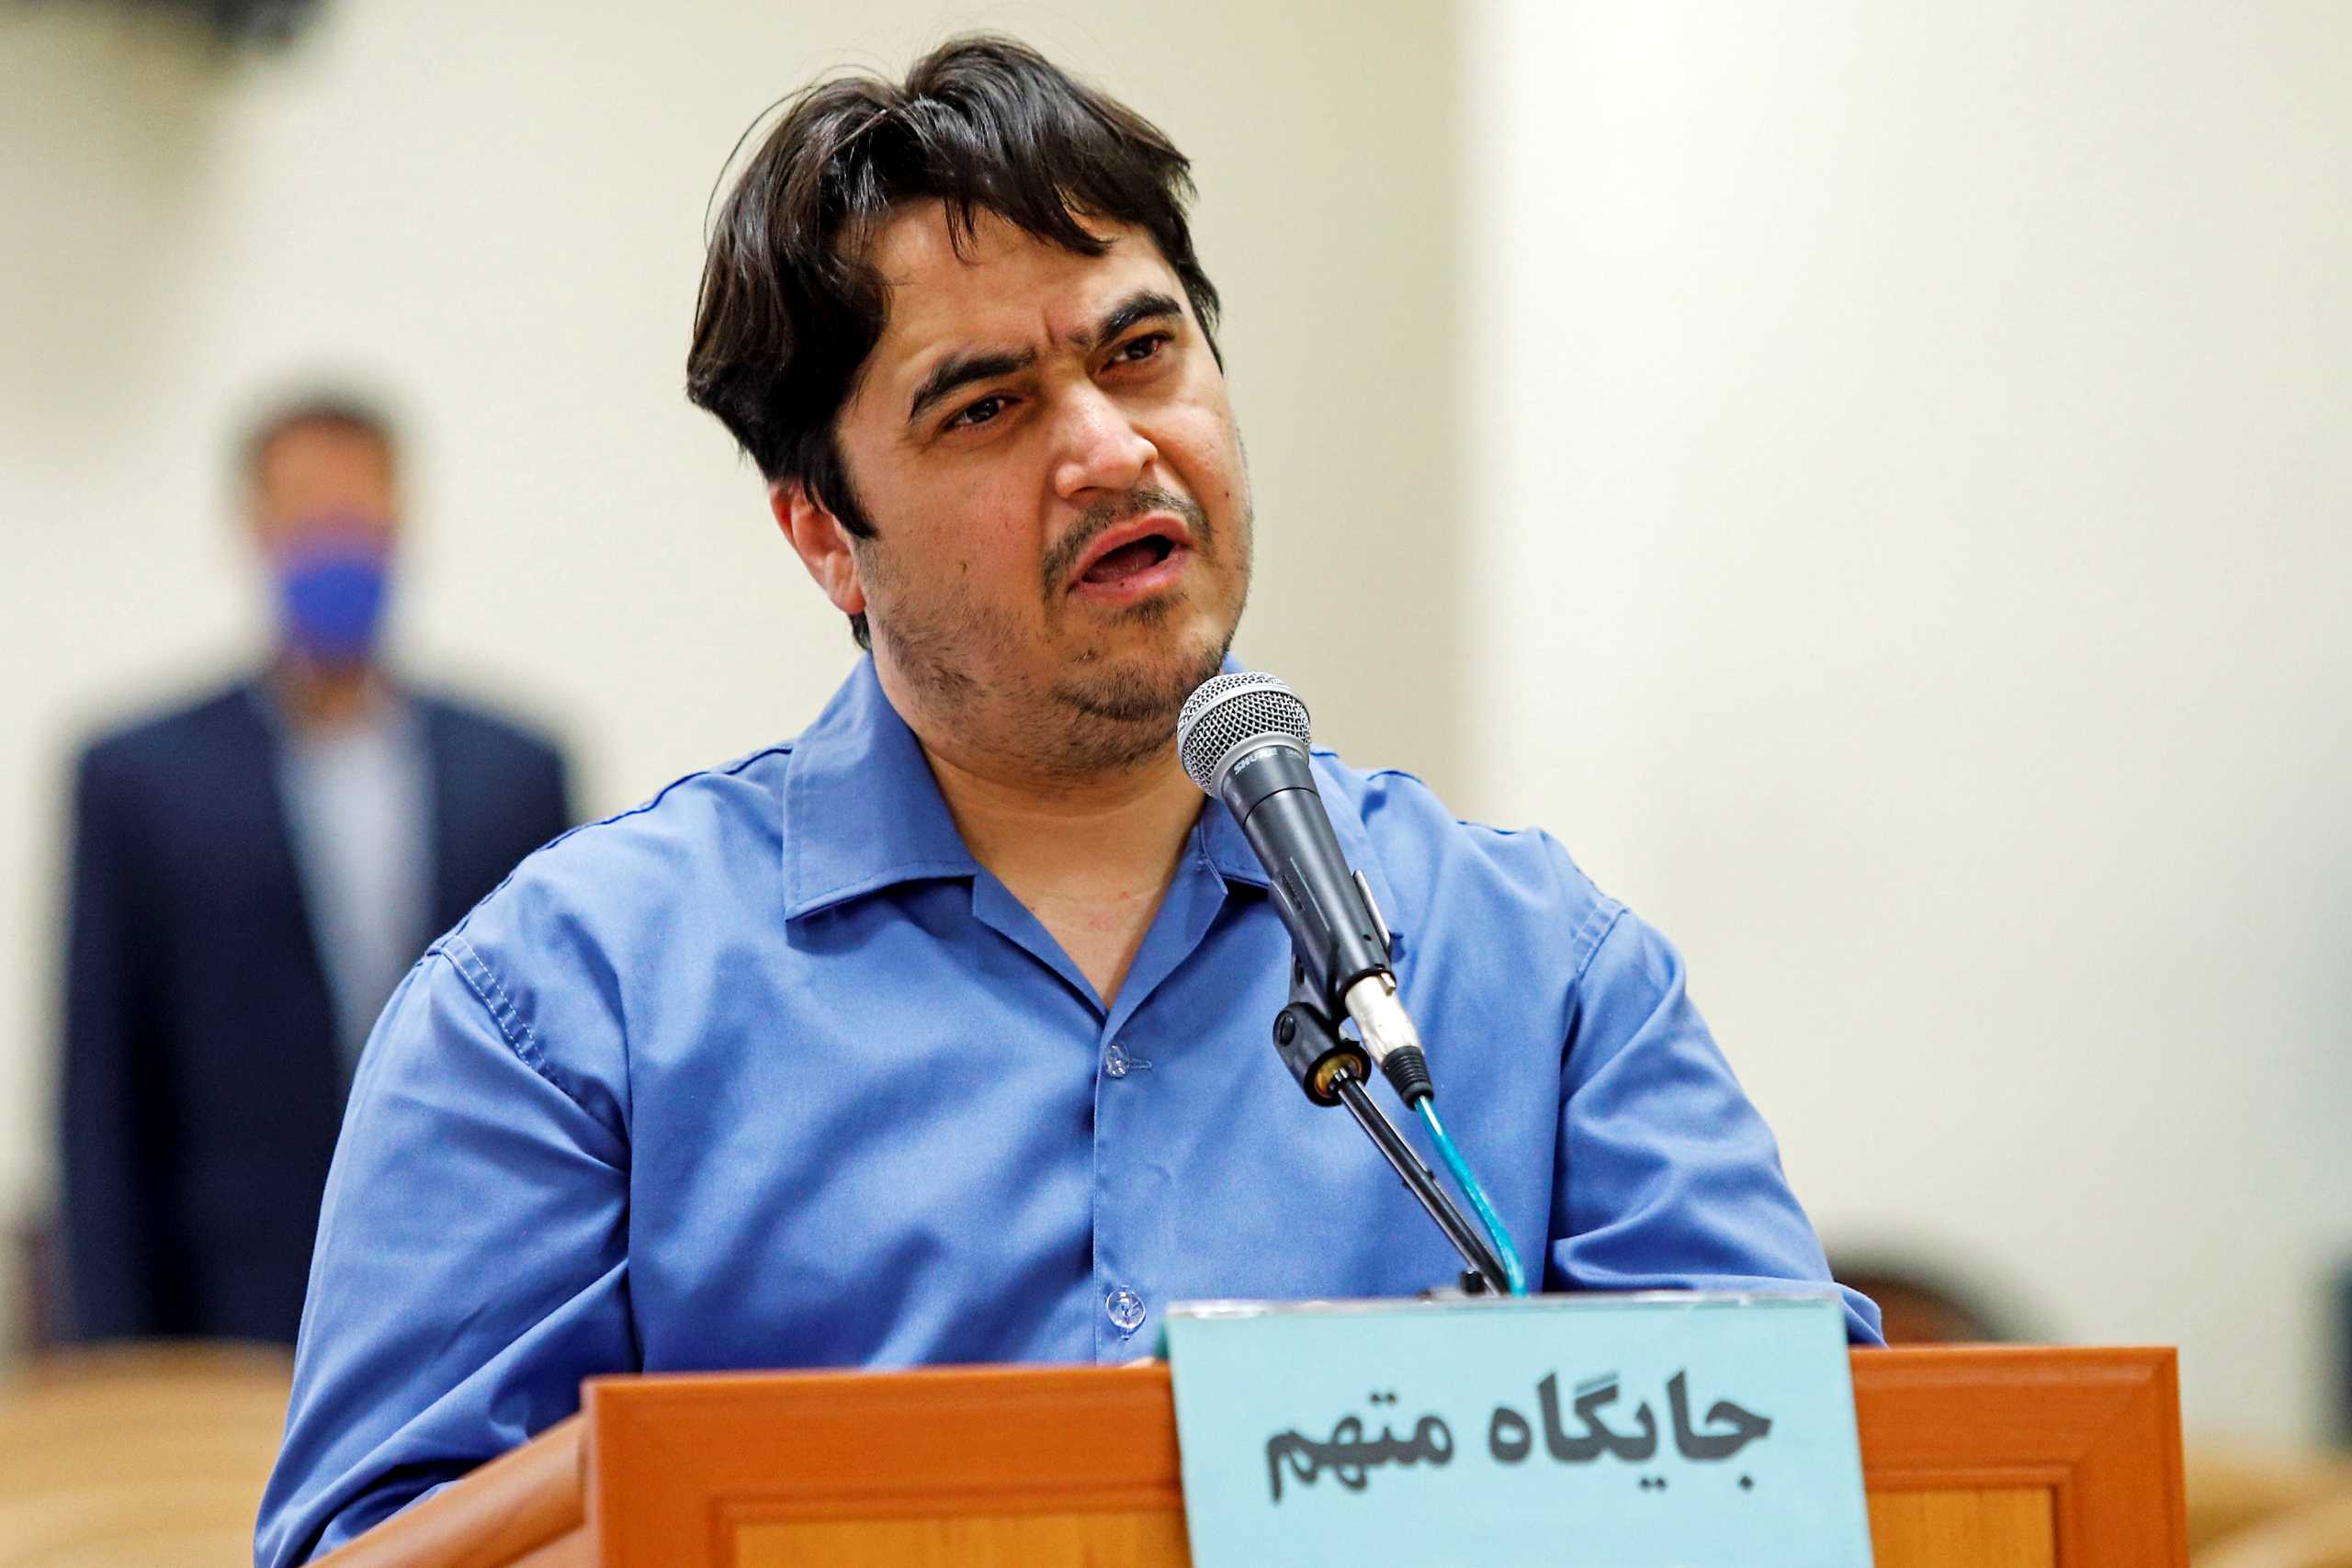 Ruhollah Zam, a dissident journalist who was captured in what Tehran calls an intelligence operation, speaks during his trial in Tehran, Iran June 2, 2020. Picture taken June 2, 2020. Mizan News Agency/WANA (West Asia News Agency) via REUTERS